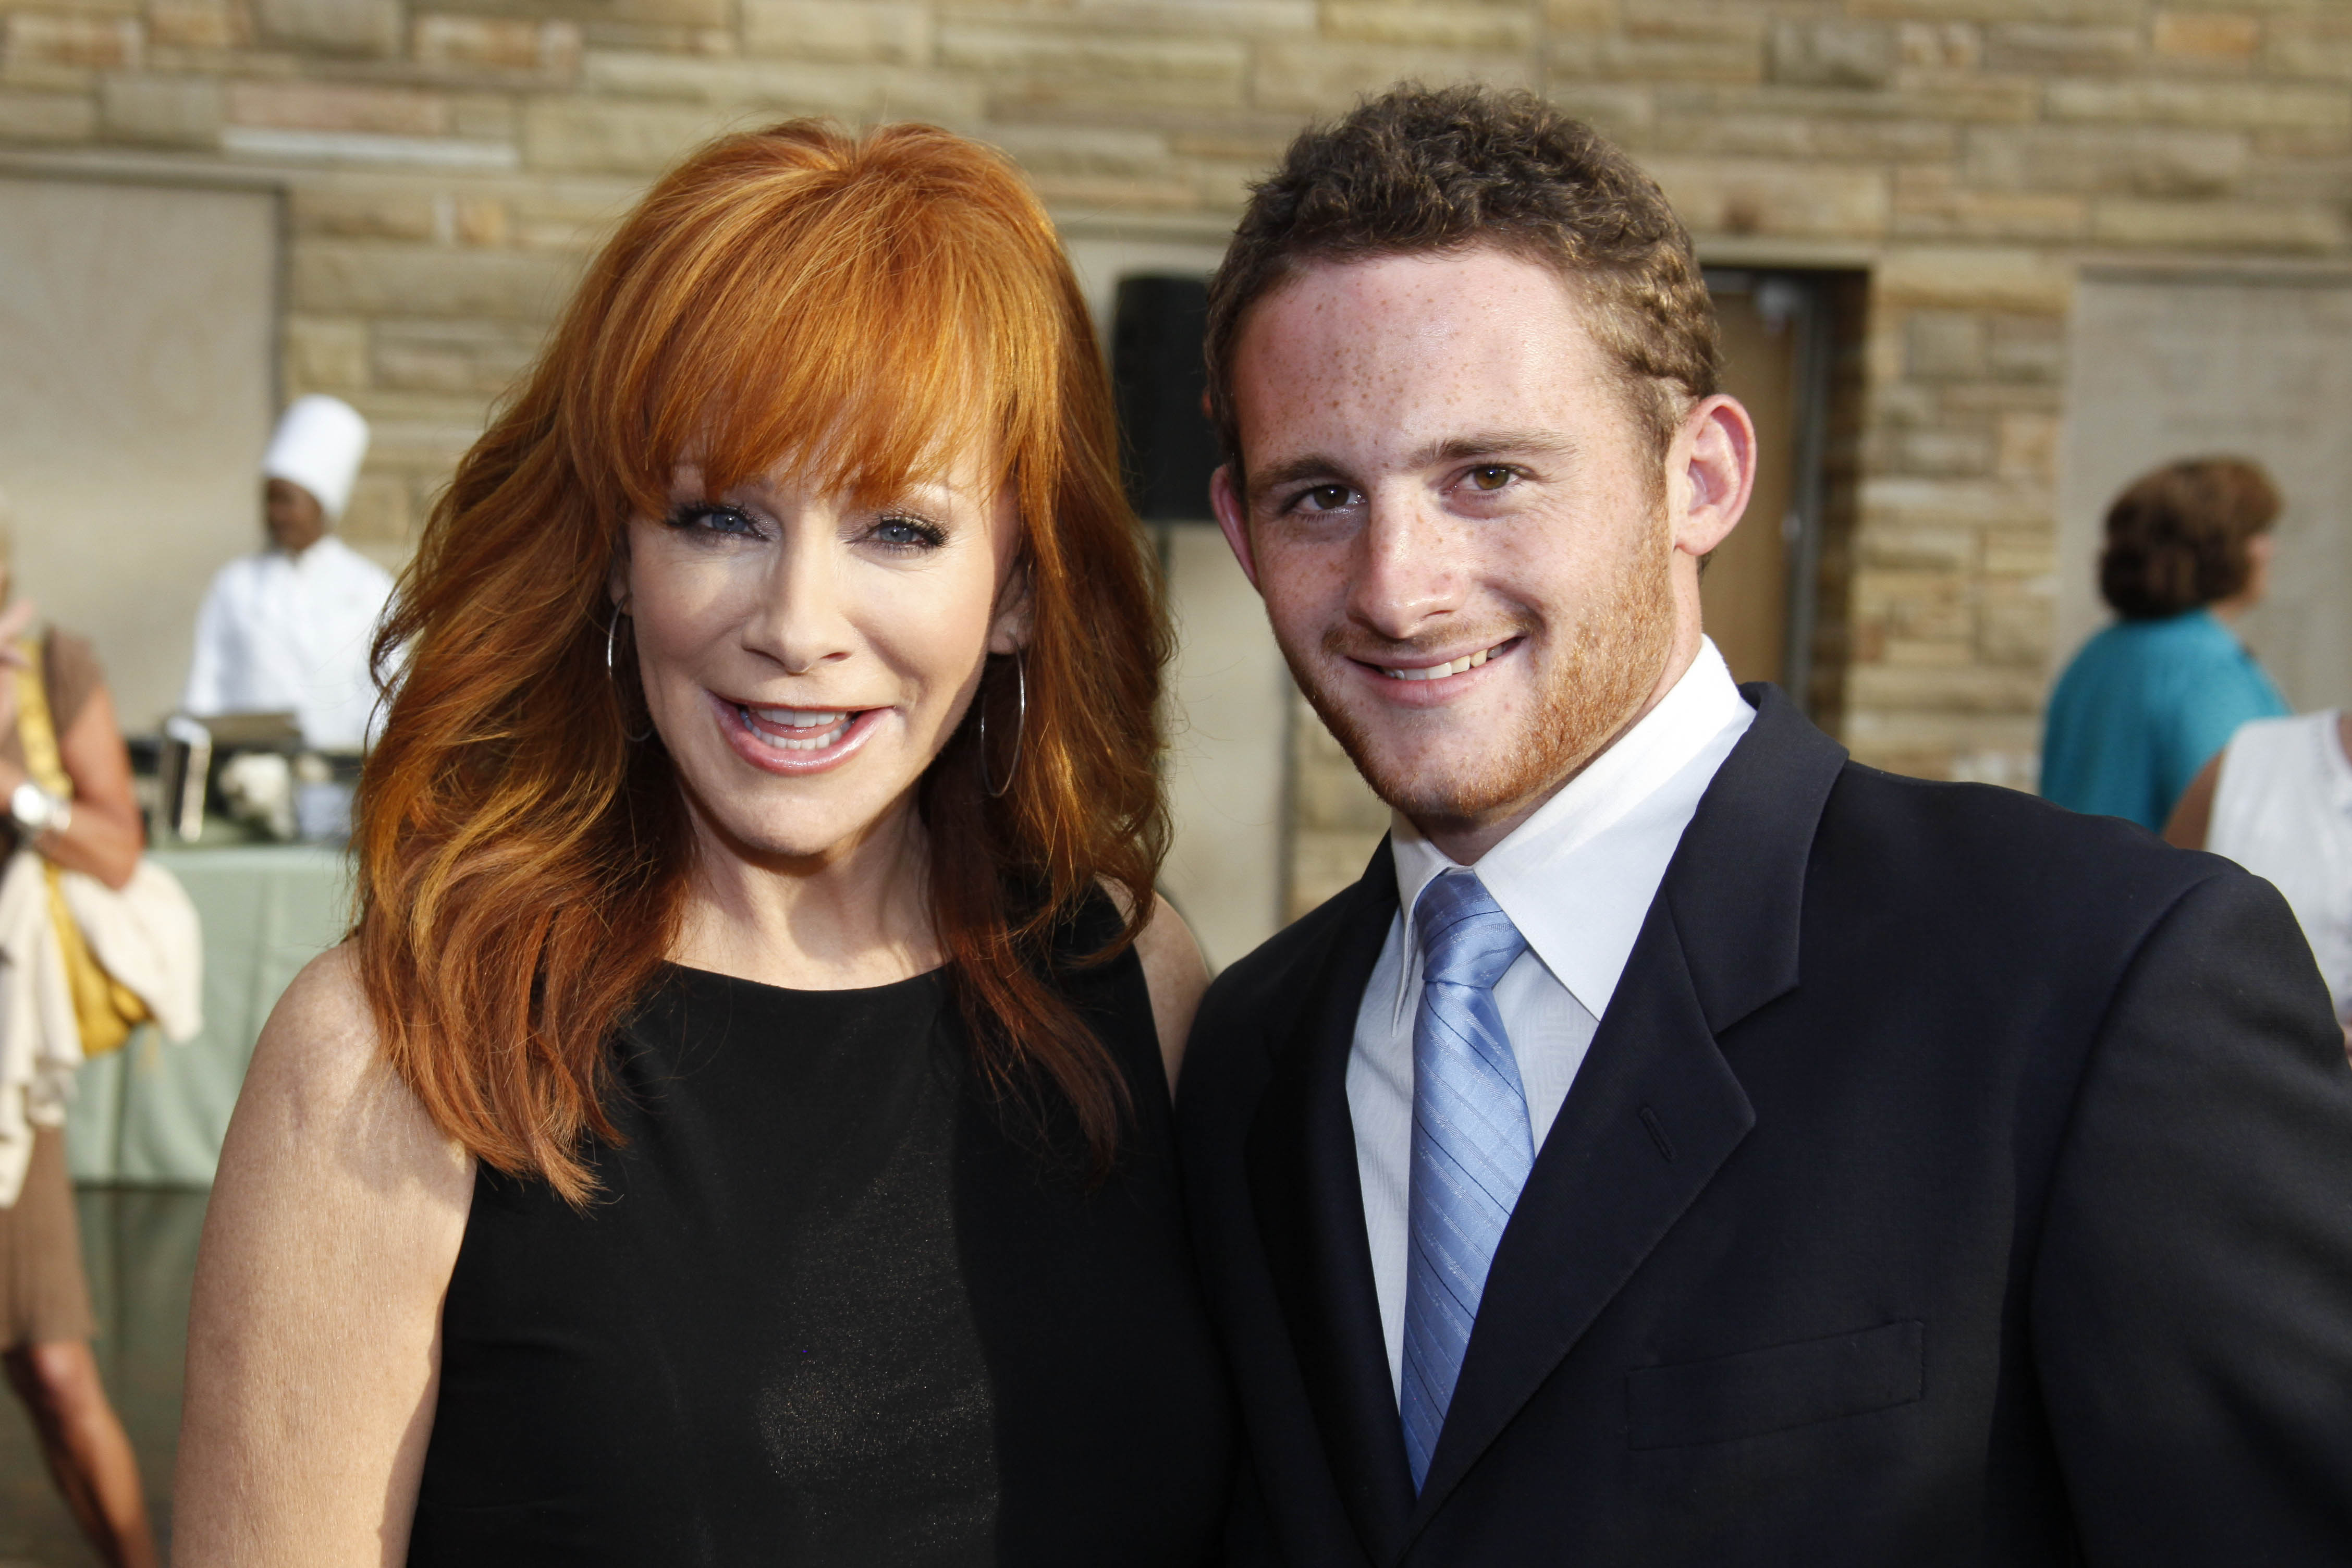 Reba McEntire and Shelby Blackstock at the 2011 Country Music Hall Of Fame Medallion Ceremony Induction in Nashville | Source: Getty Images